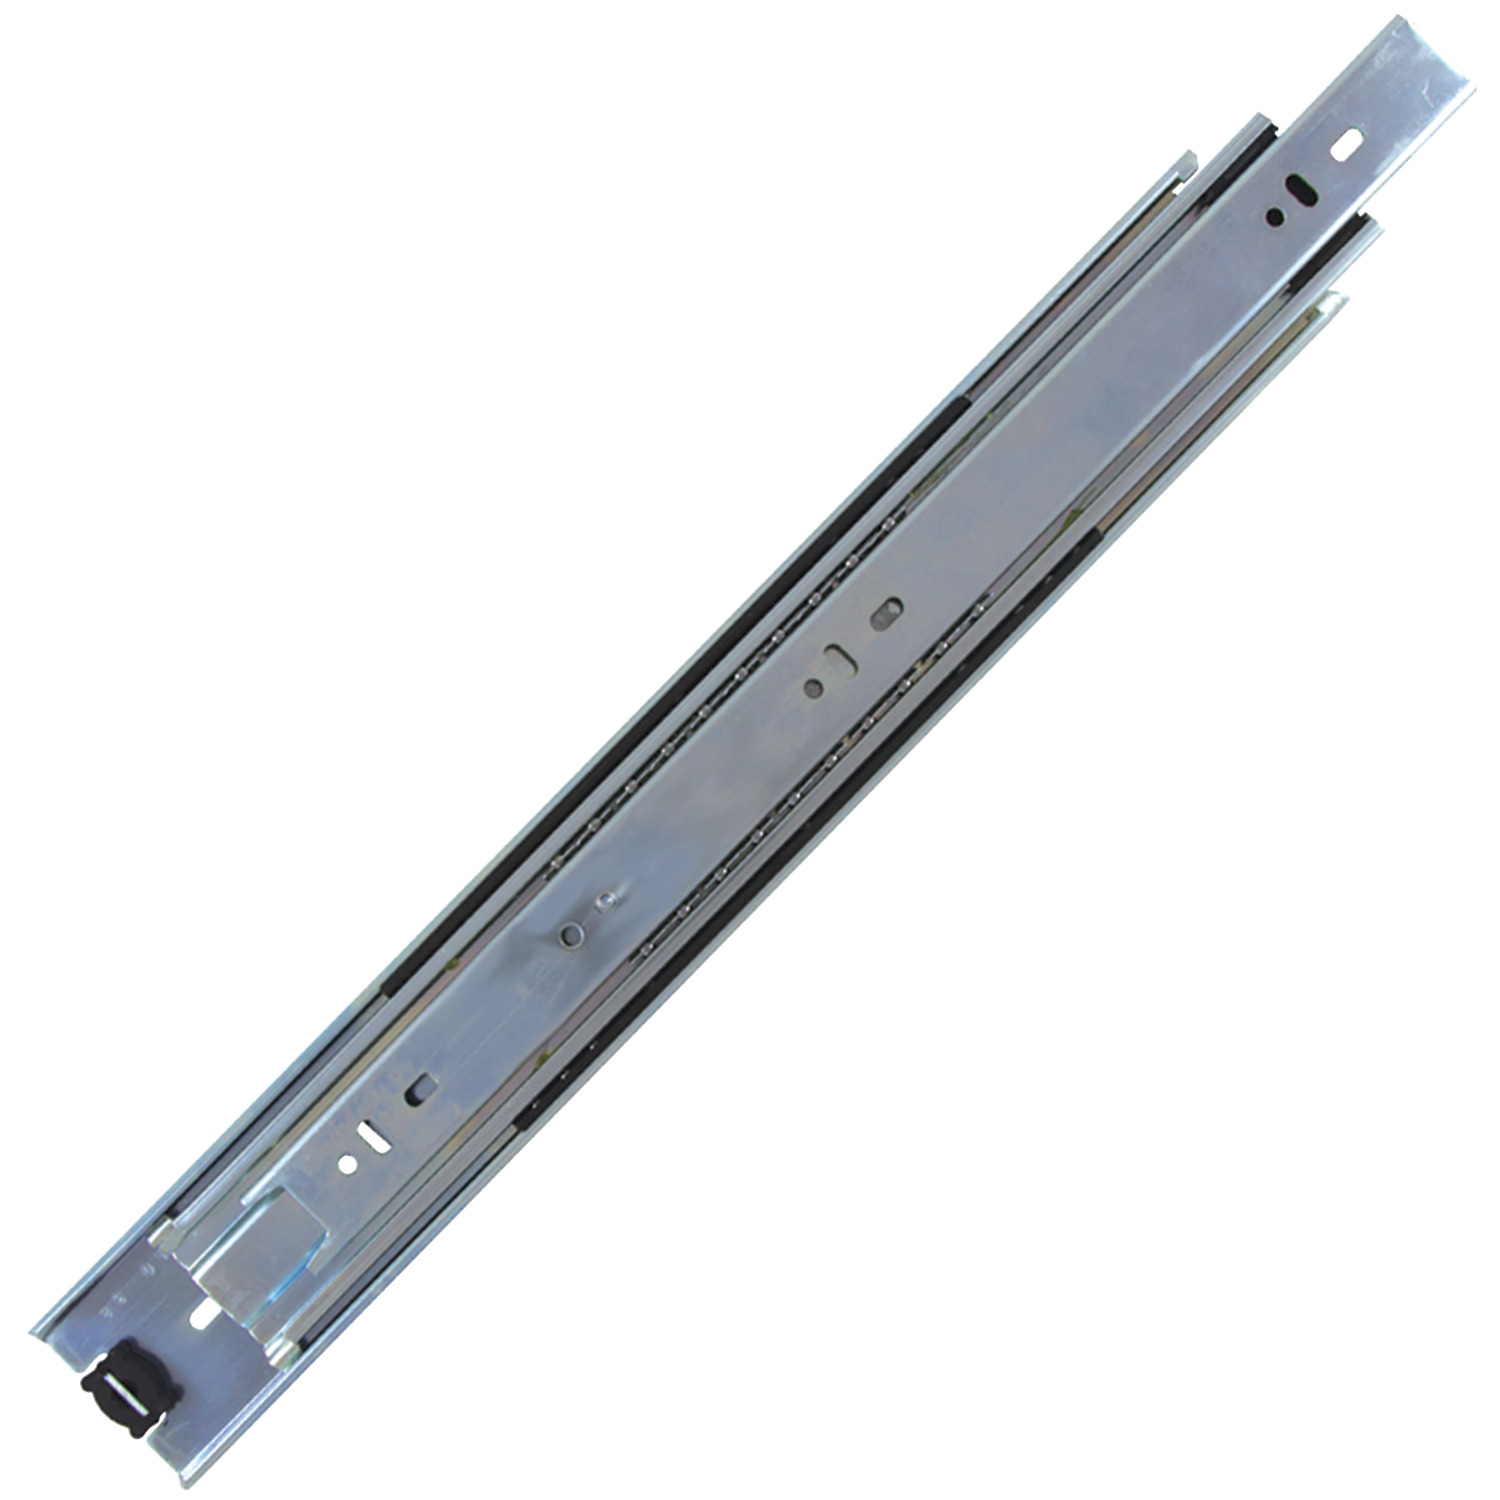 Drawer Slide - Full Extension Drawer slide with a load of up to 60kg per pair, tested to 80,000 usage cycles.